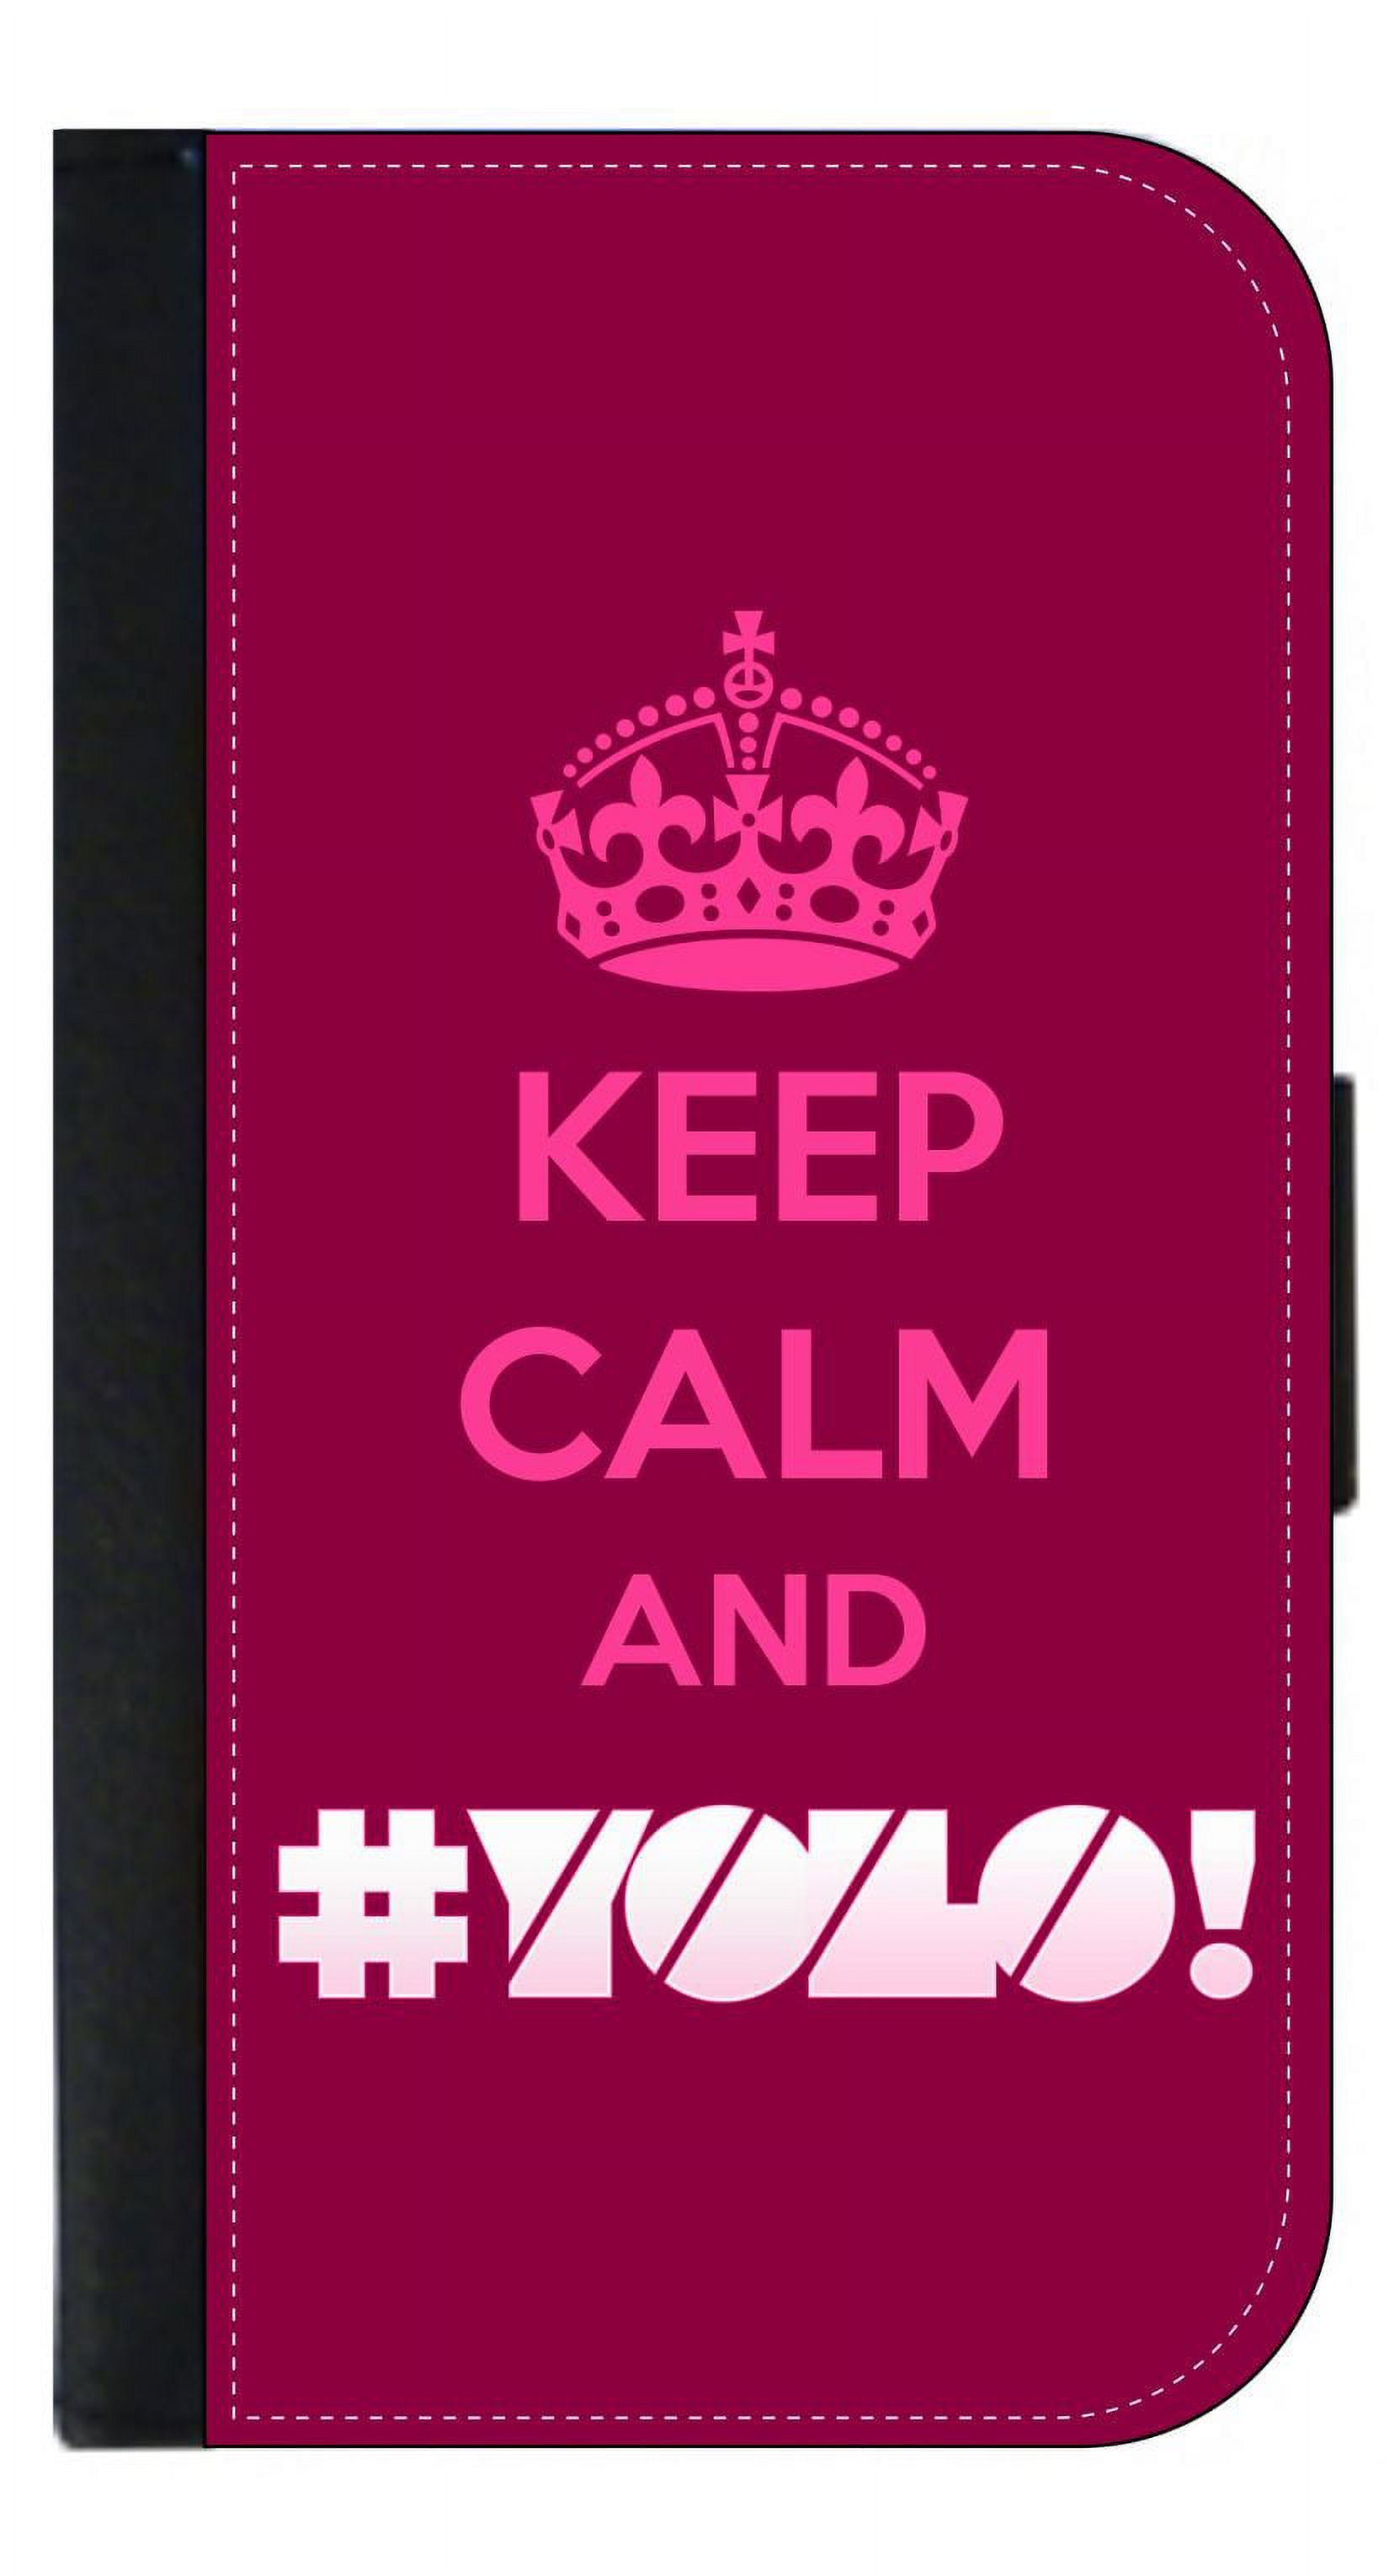 Keep Calm and #YOLO! - Wallet Flip Style Phone Case Compatible with the Apple iPhone 7 / Apple iPhone 8 Universal - image 1 of 3